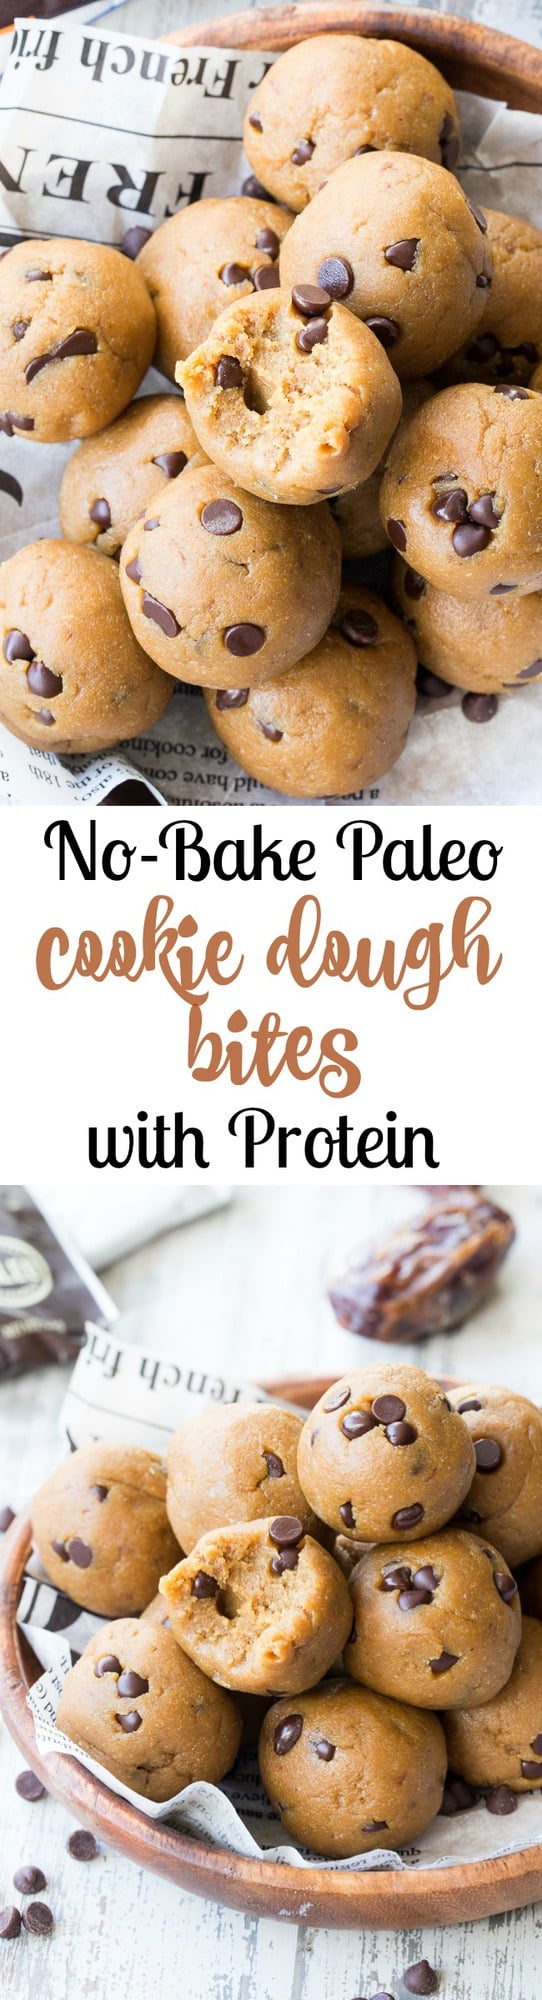 These tasty no-bake Paleo cookie dough bites are made with real-food ingredients, sweetened with dates and bananas and pack a punch of Paleo friendly protein along with the taste and texture of chocolate chip cookie dough!